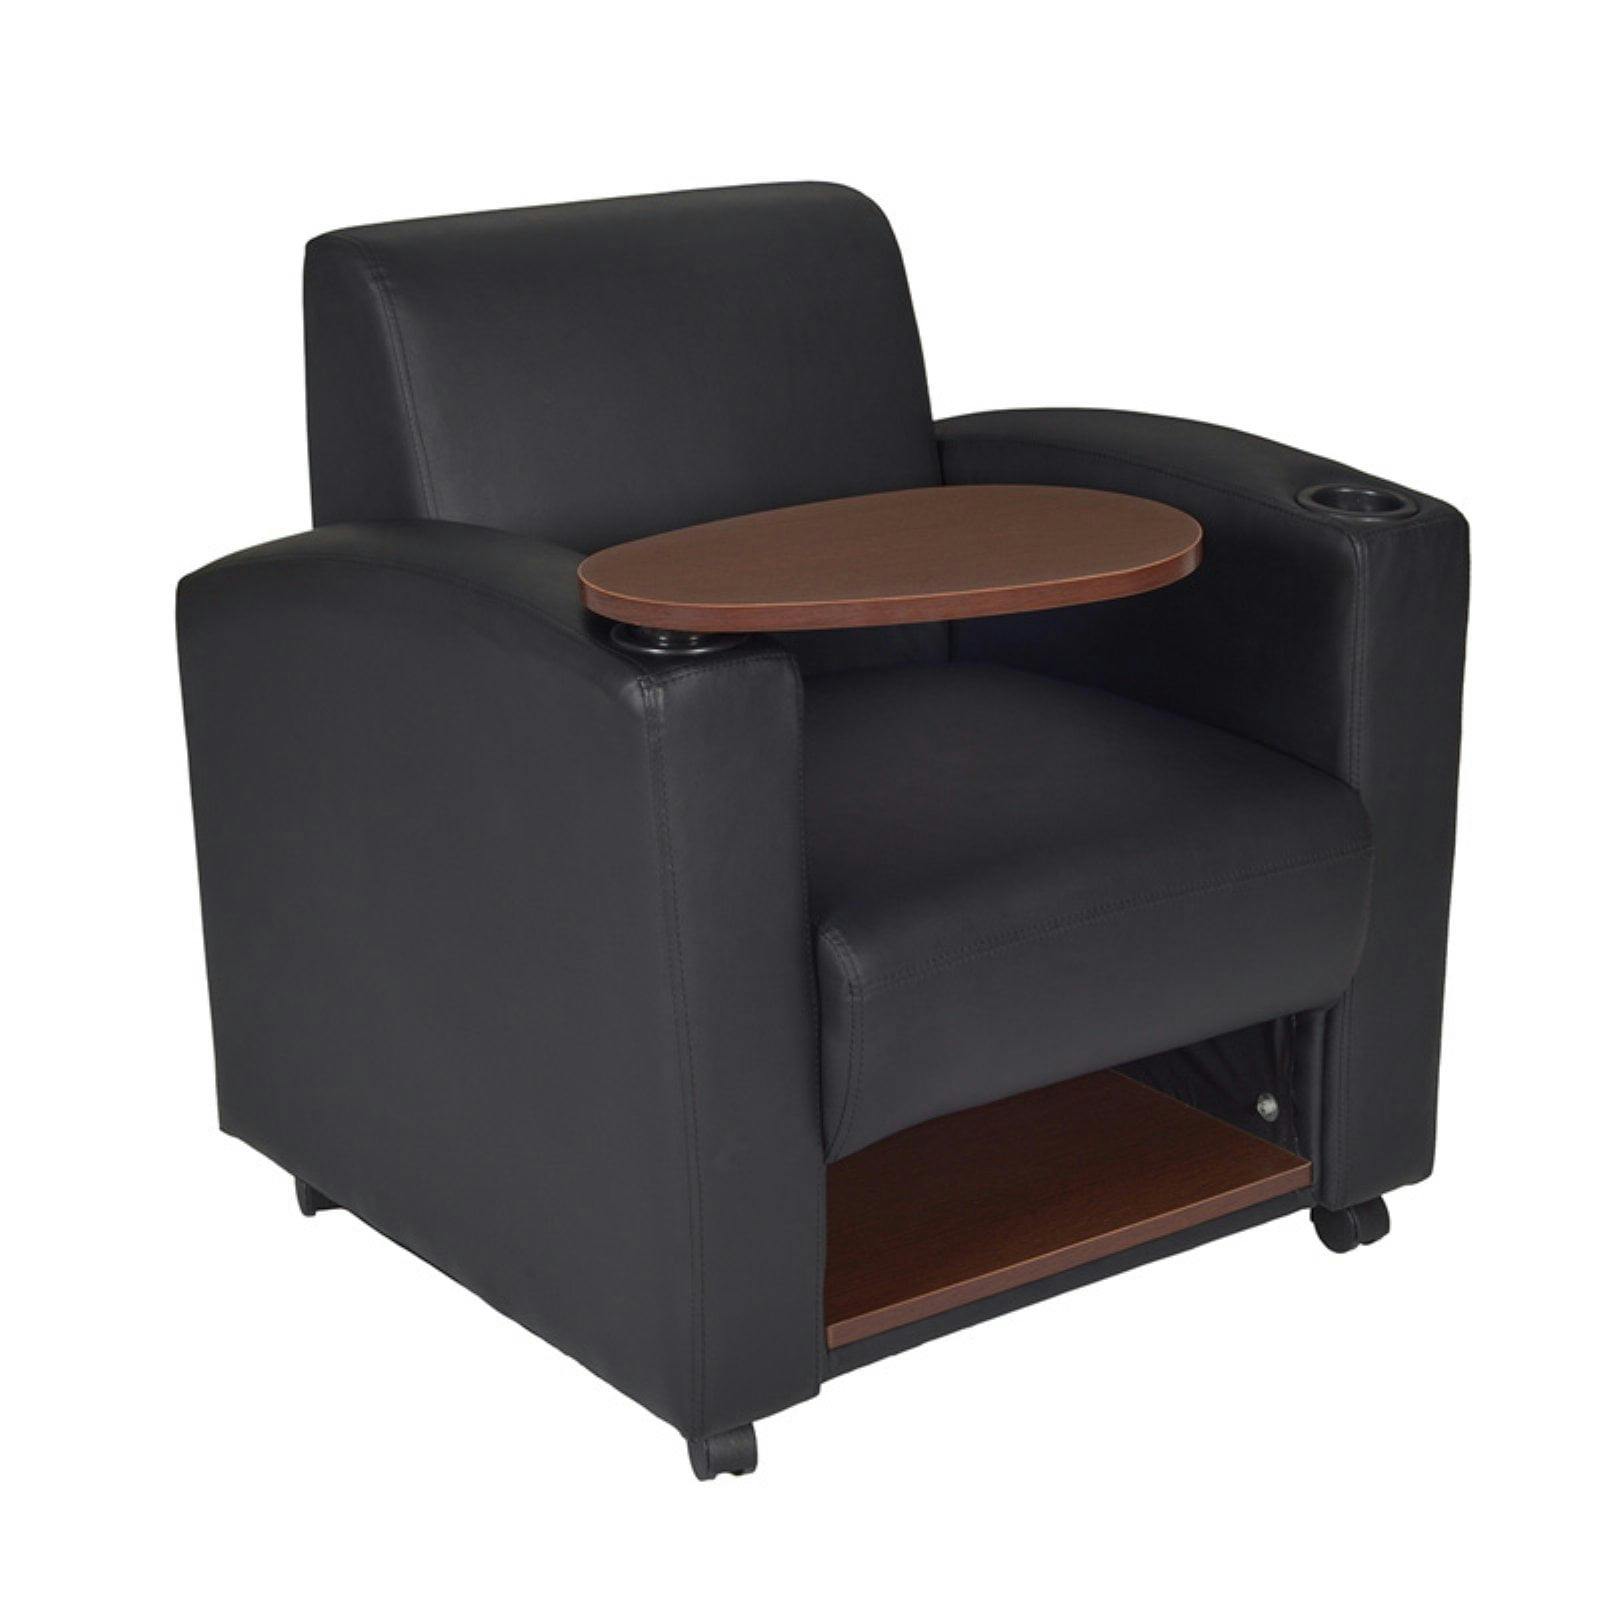 Nova Black Swivel Tablet Arm Chair with Built-In Storage